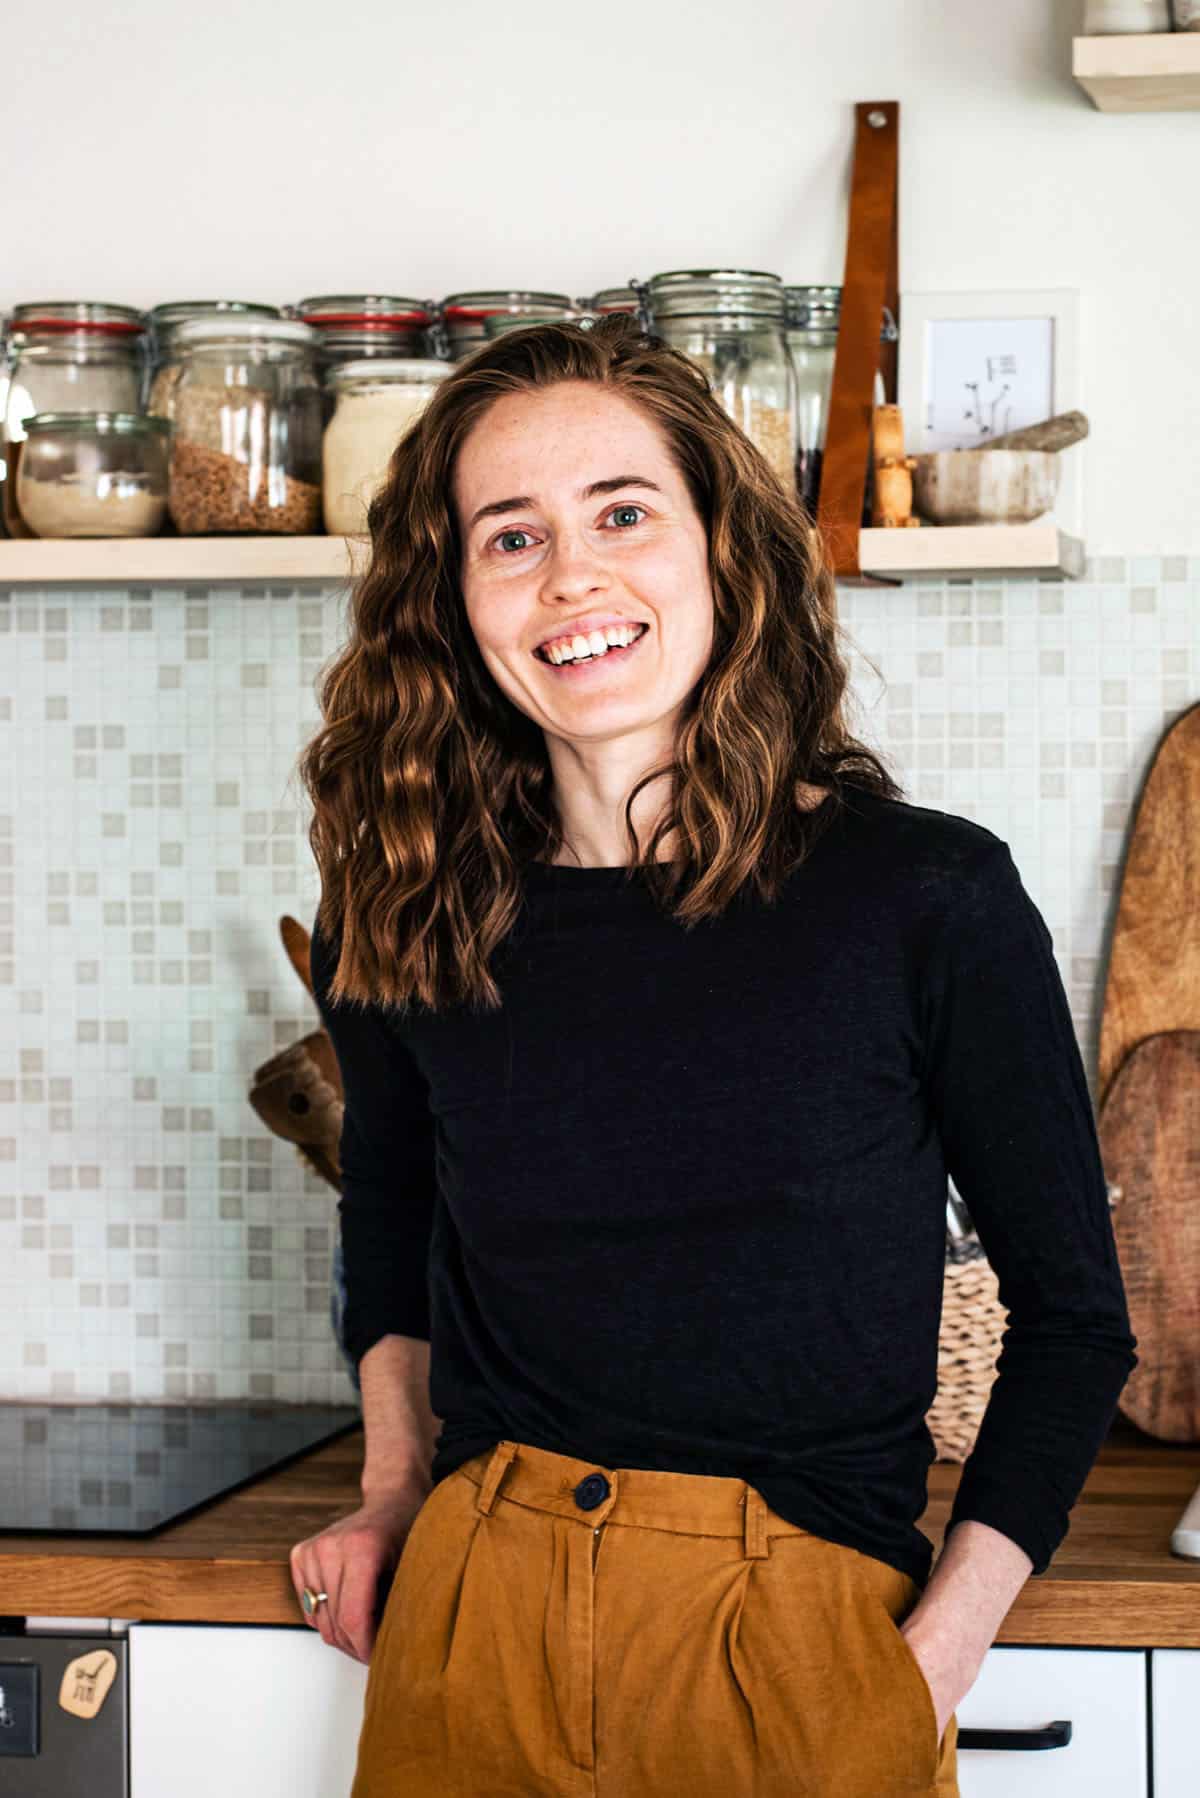 A smiling woman in a kitchen setting.